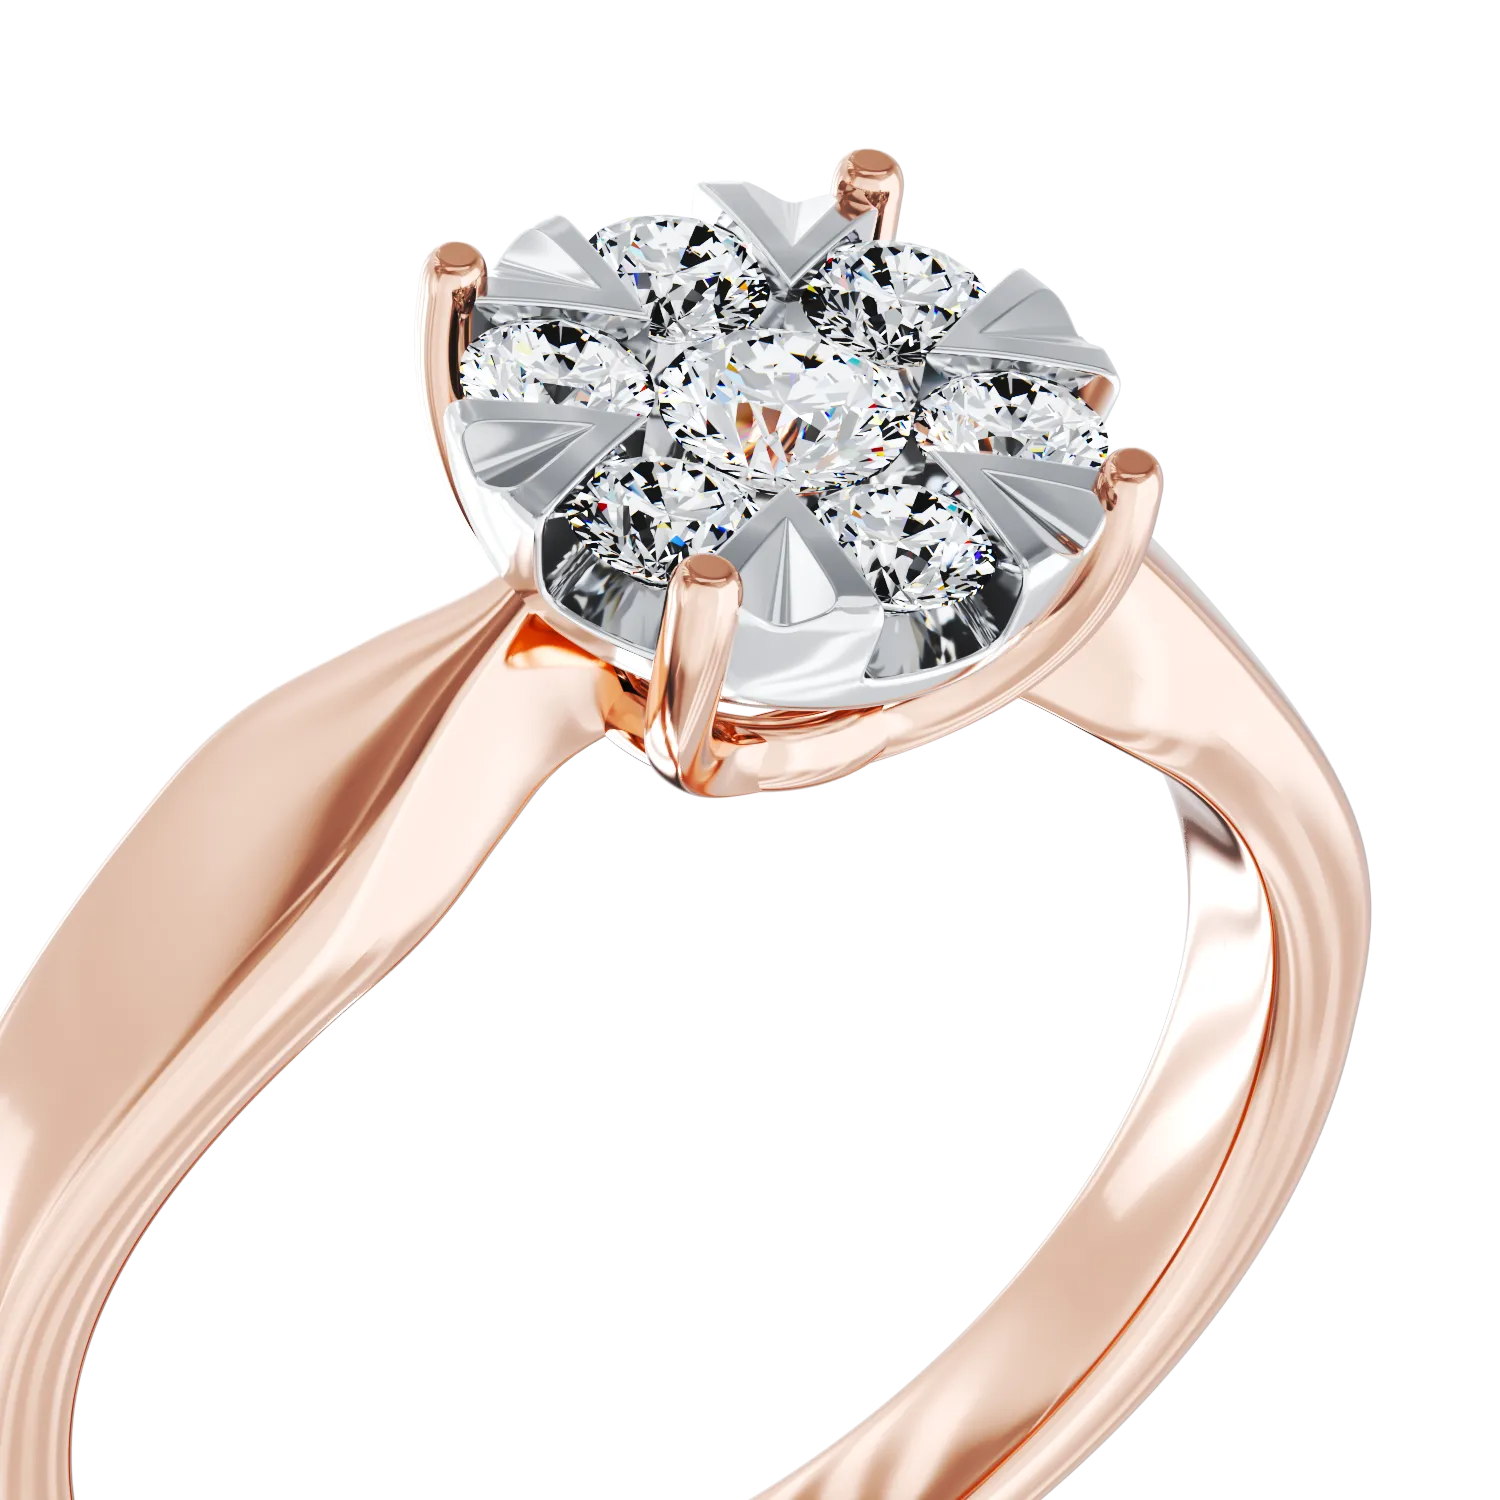 18K rose gold engagement ring with 0.34ct diamonds